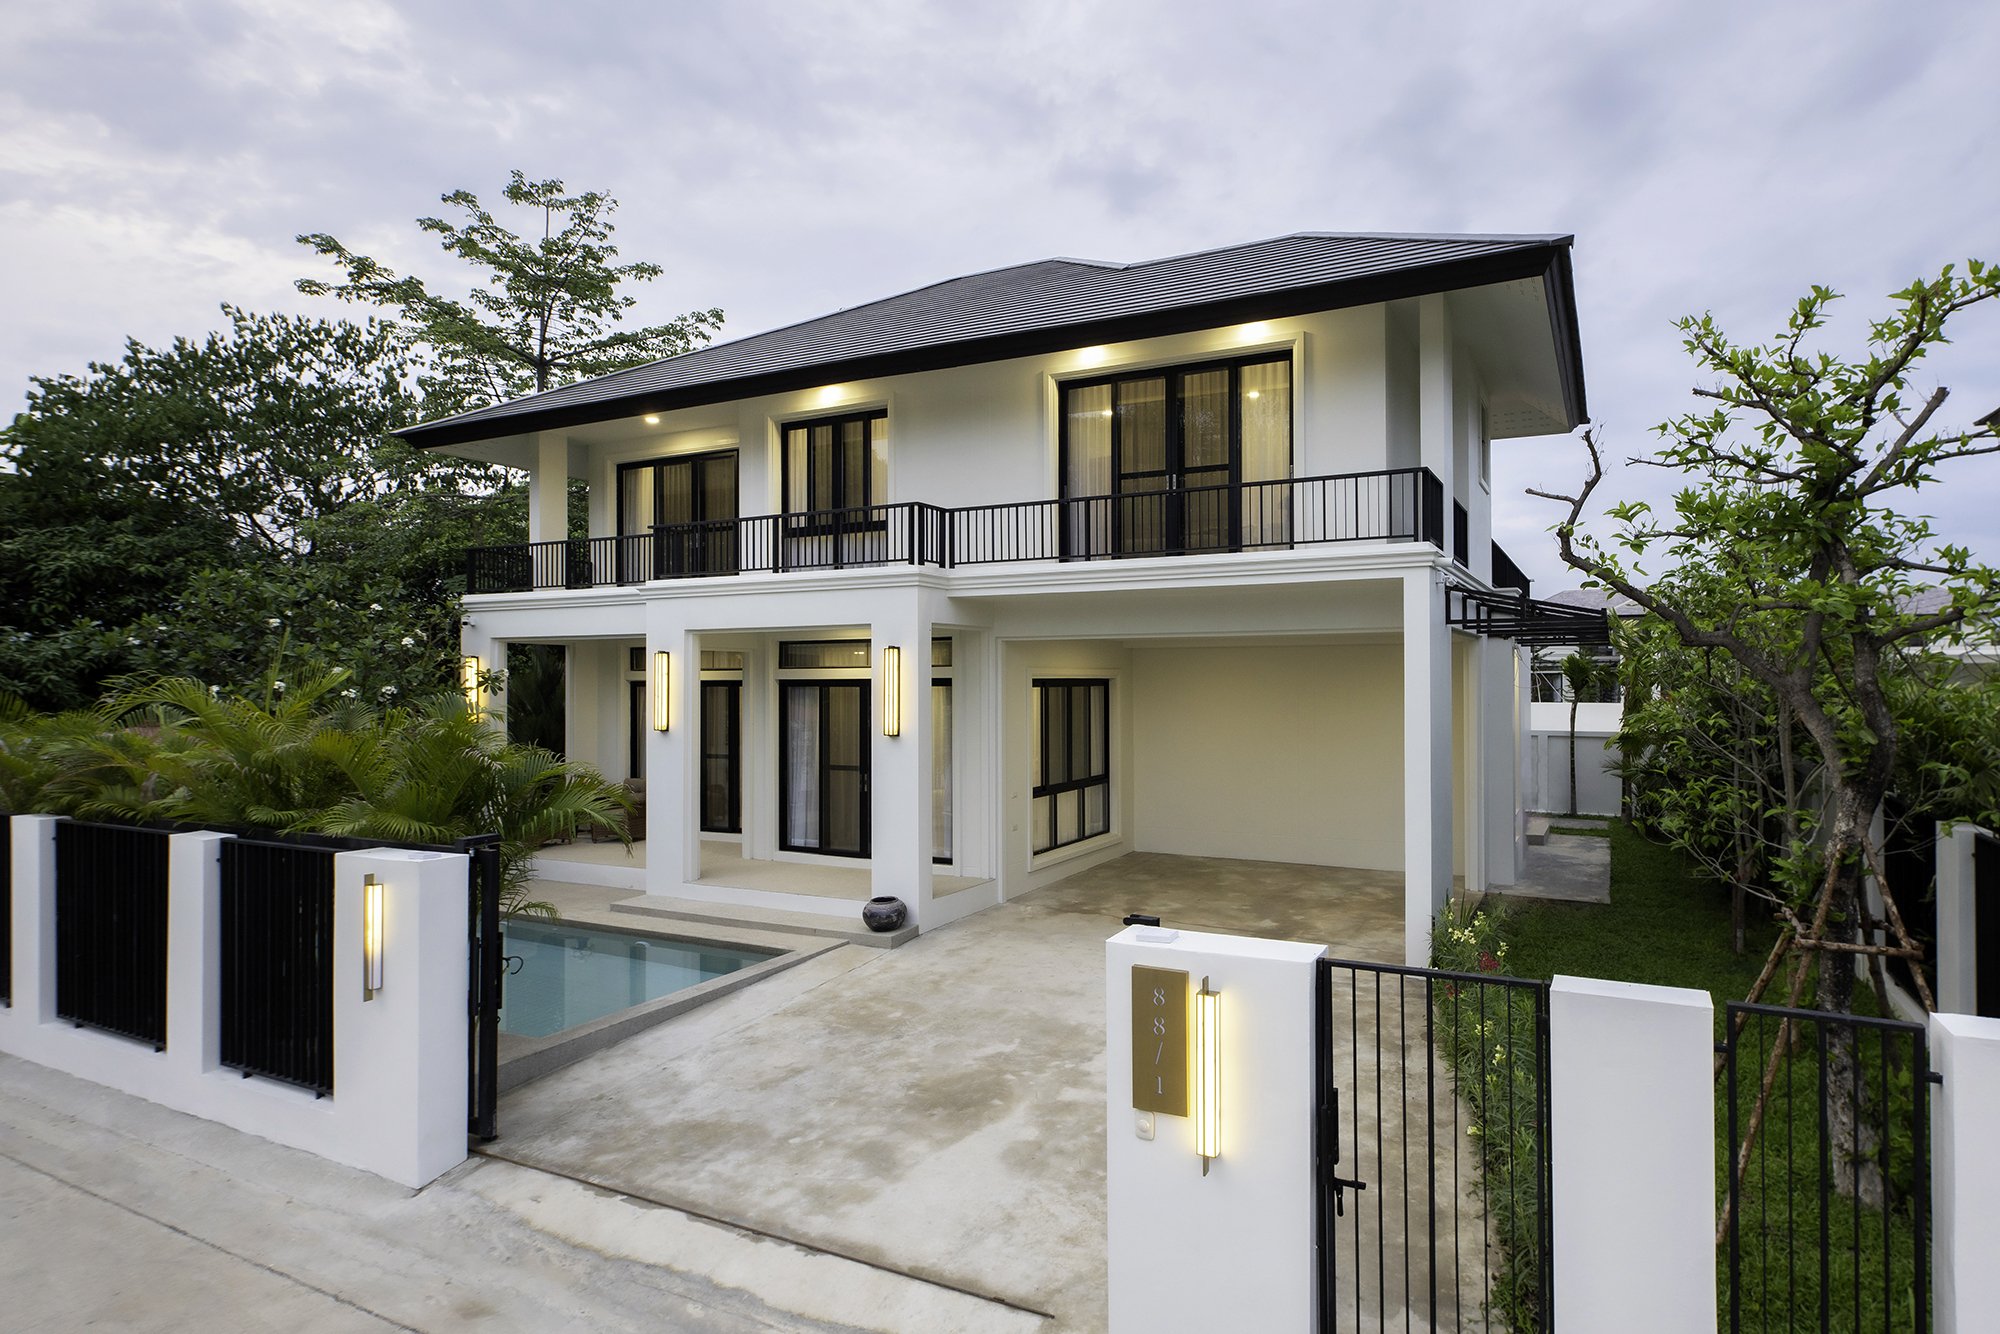 4-Bedroom Villa with a Private Pool in the Peaceful Chiang Mai